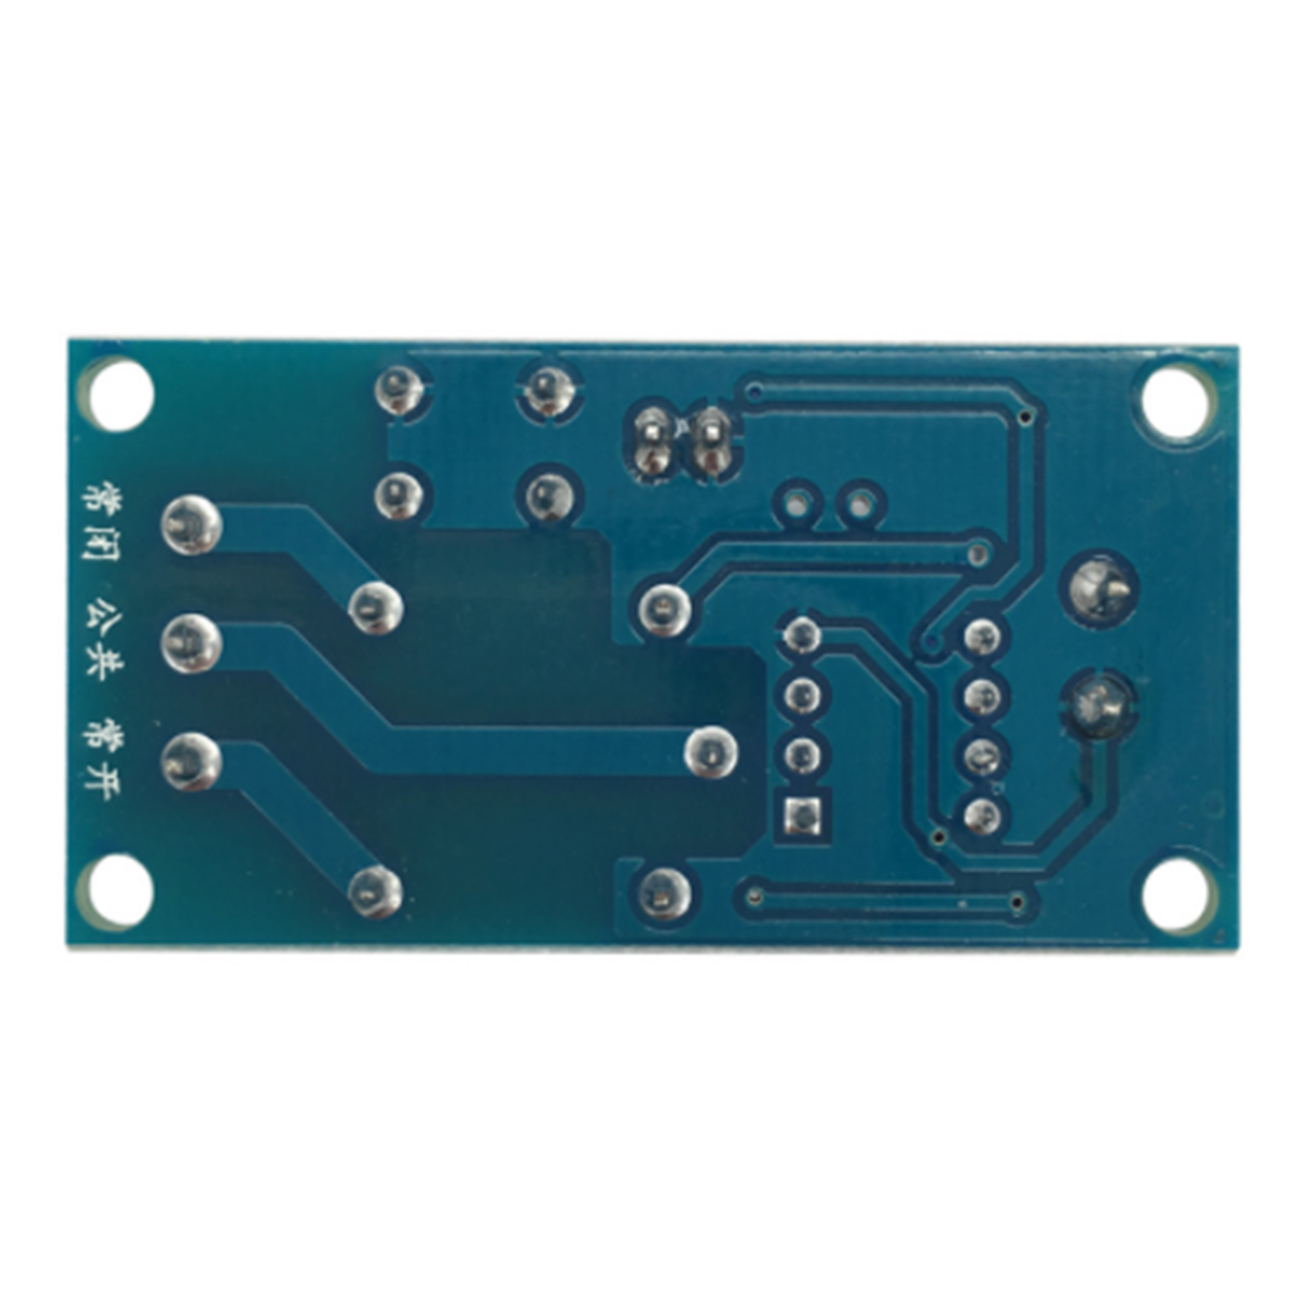 1 Channel 5V/12V/24V Latching Self-locking Relay Module With Touch Bistable Switch MCU Control 1 Channel Relay With Trigger Line